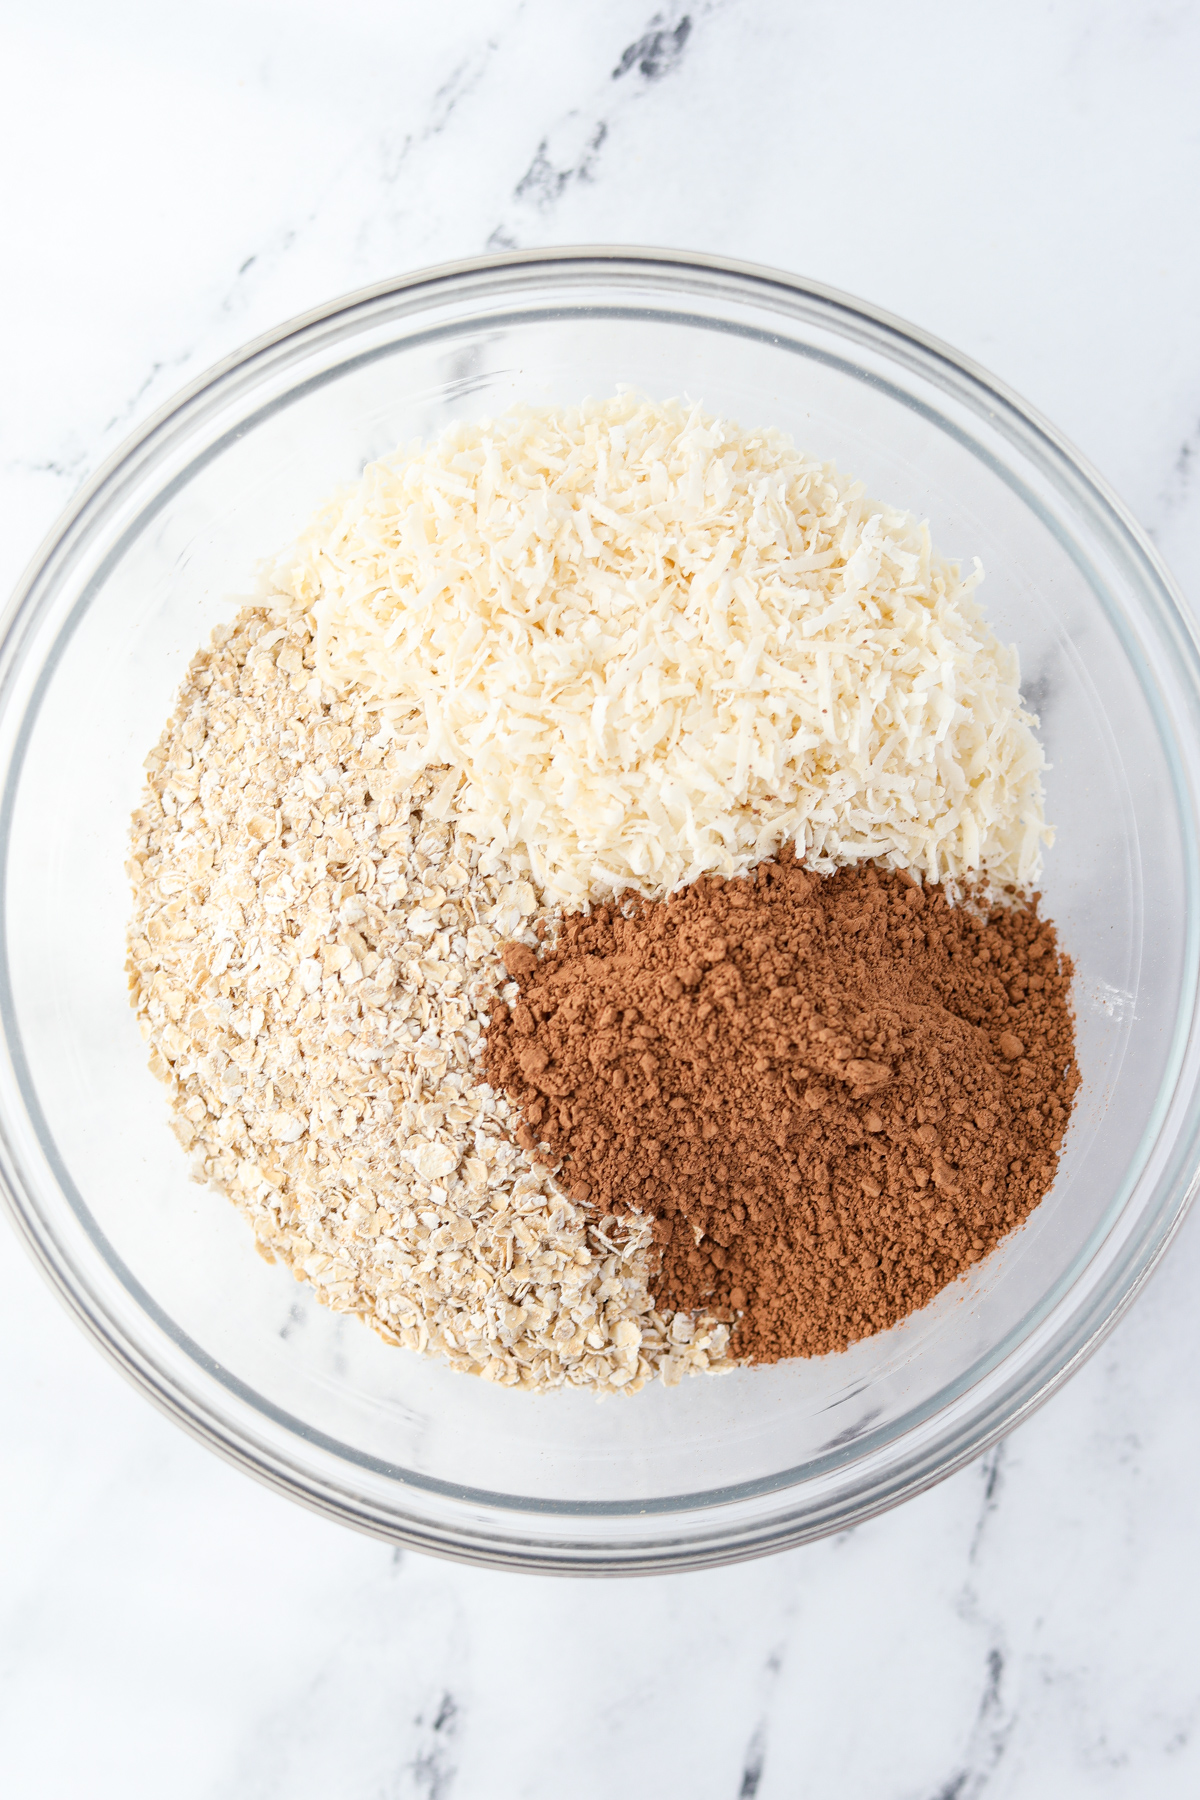 A bowl of oats, coconut, and cocoa powder ready to be mixed together.